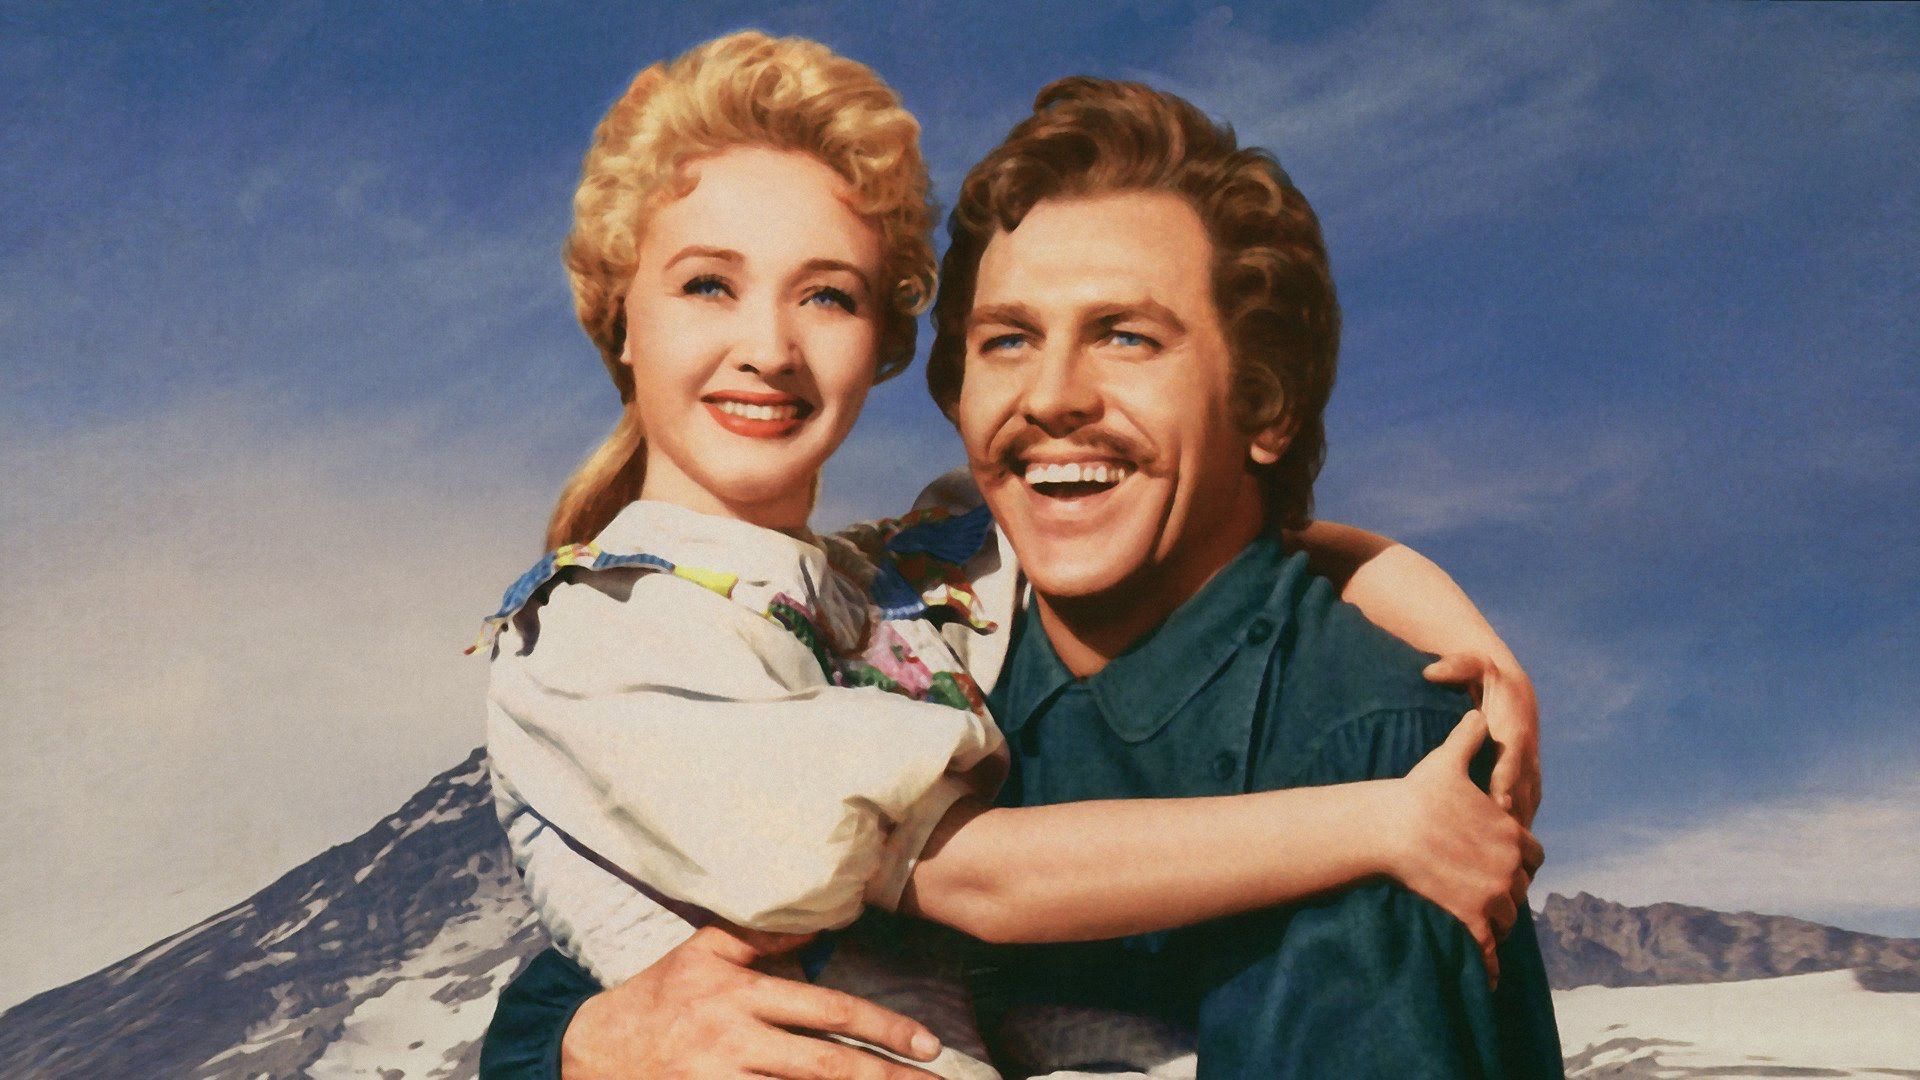 Seven Brides for Seven Brothers Backdrop